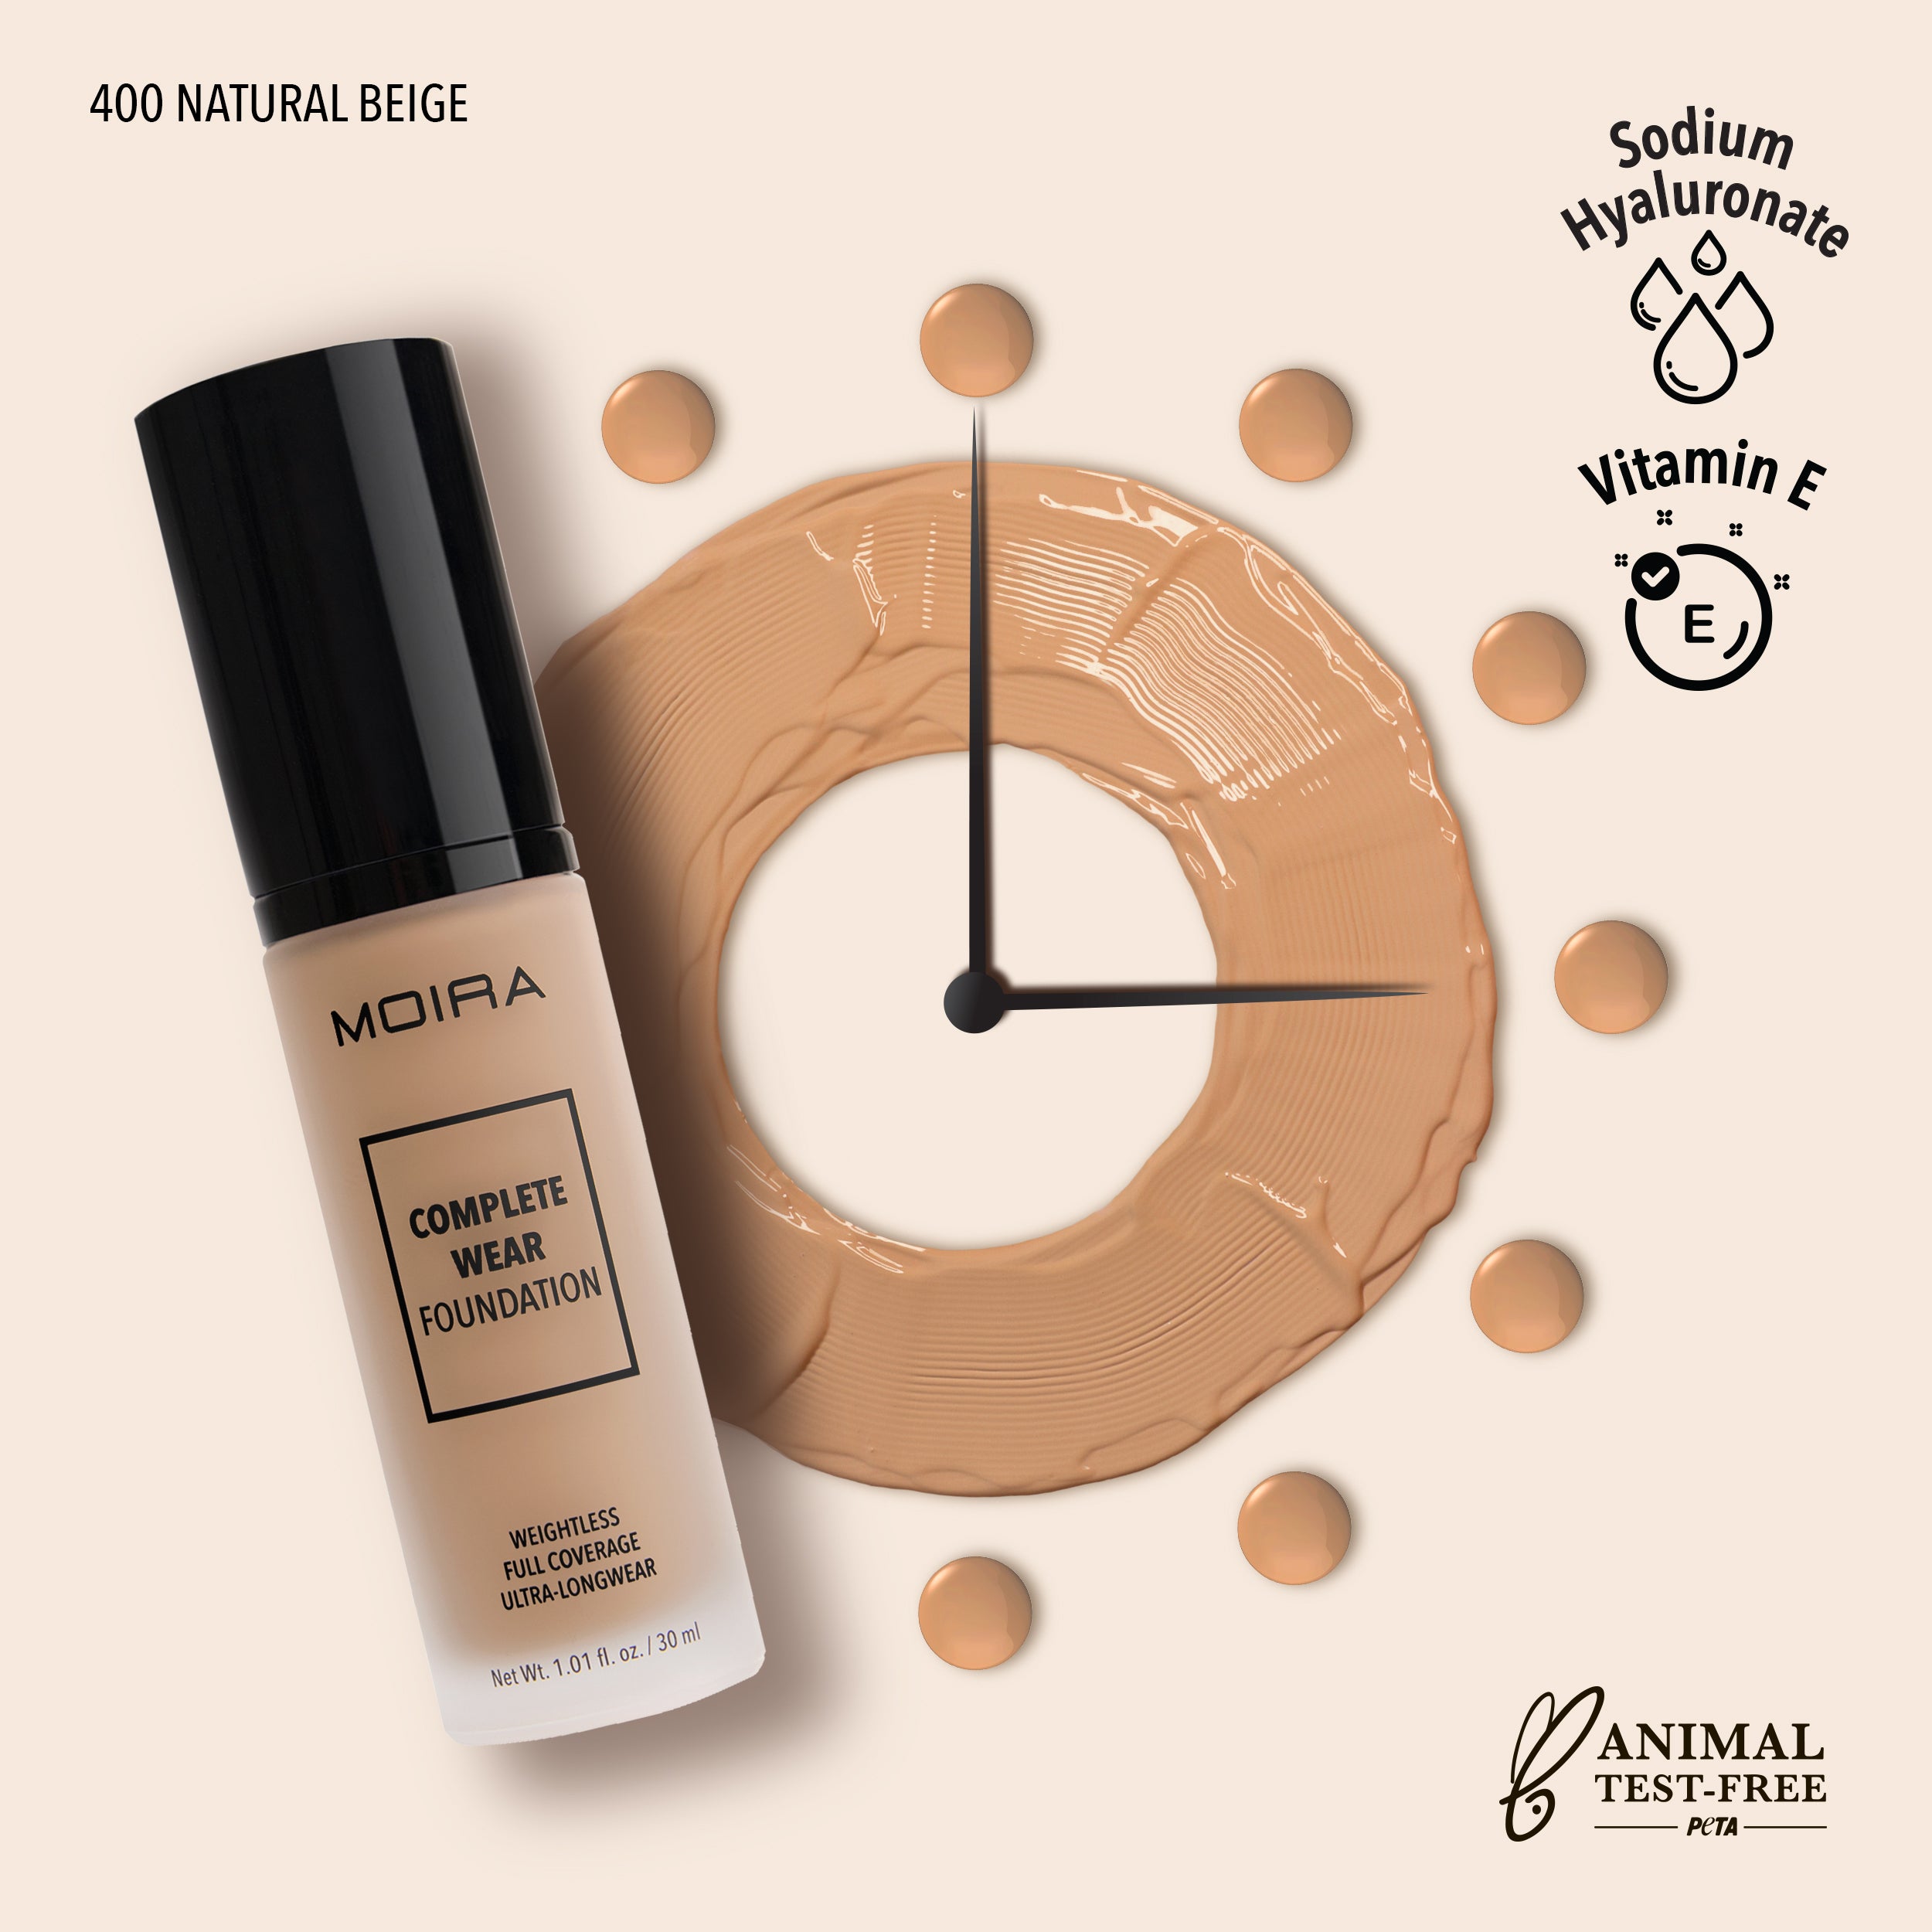 Moira Complete Wear Foundation 200 (Bisque)